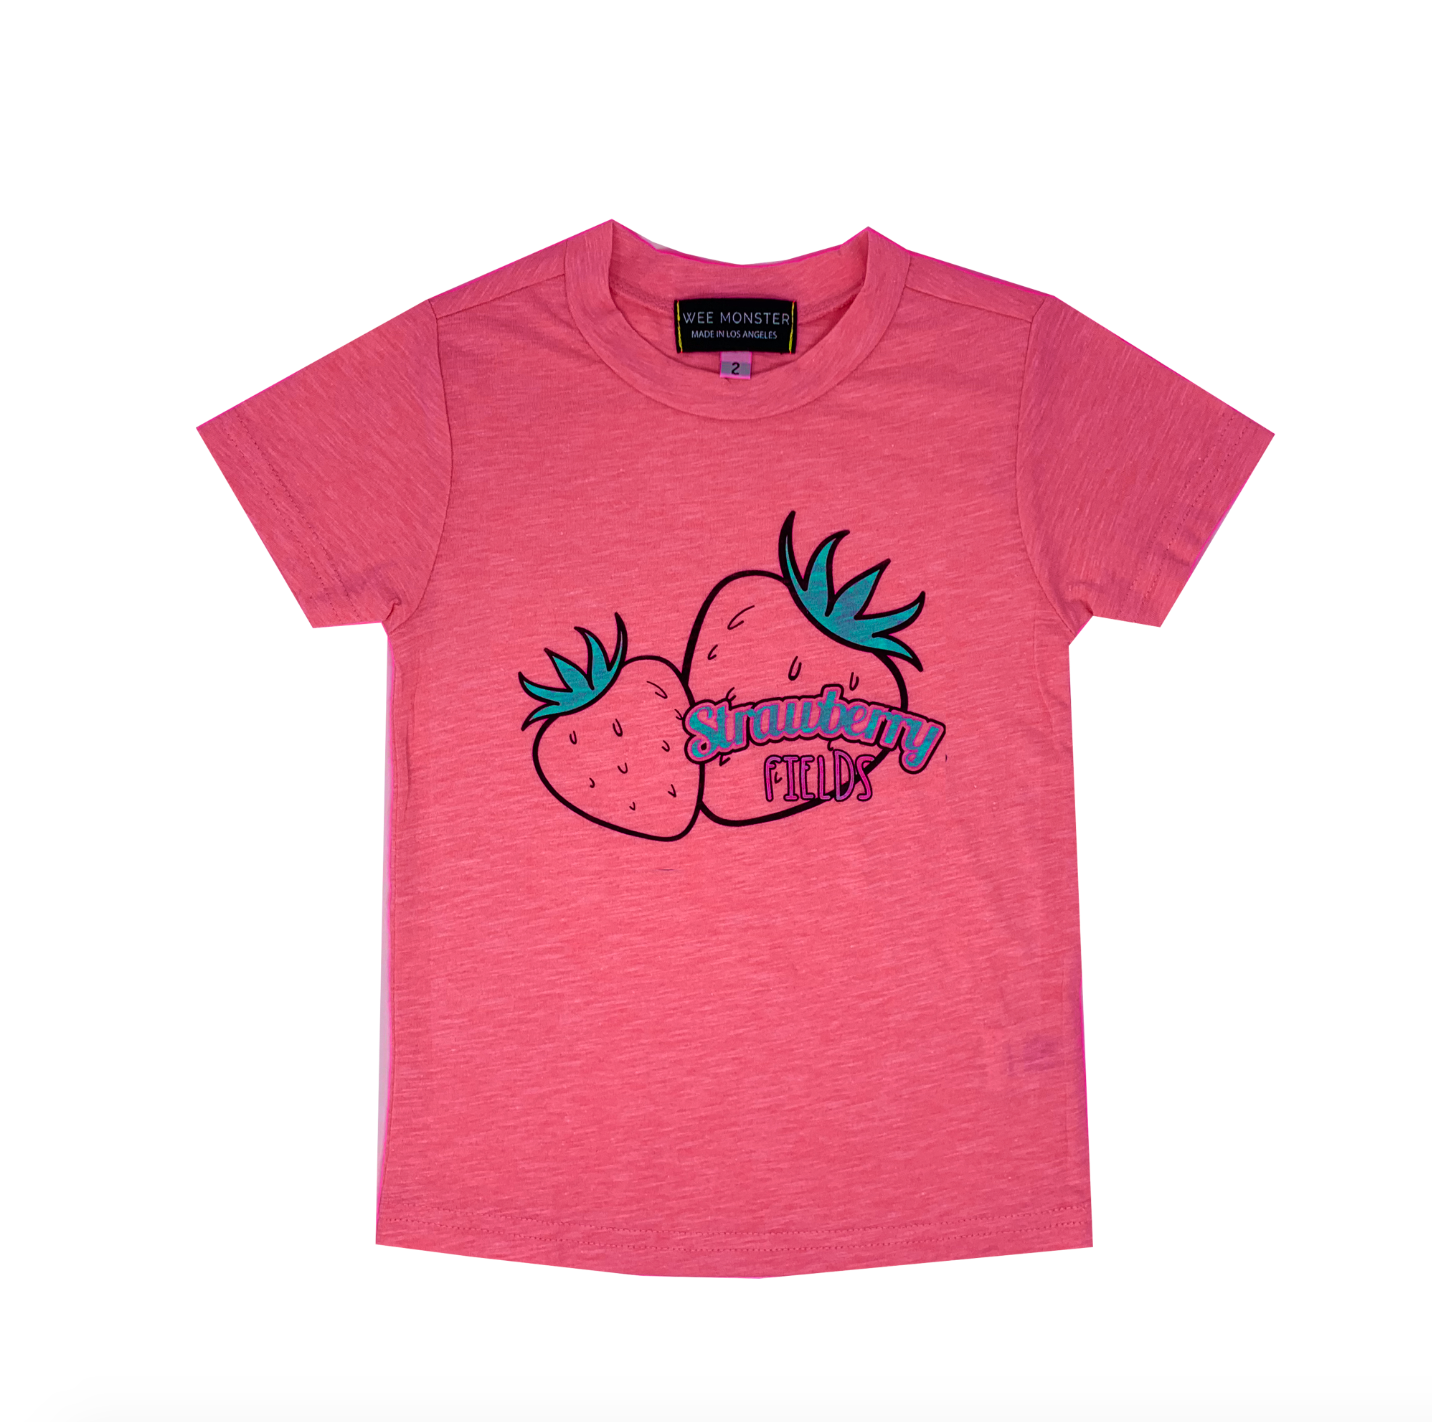 Strawberry Fields Tee - Unisex for Boys and Girls